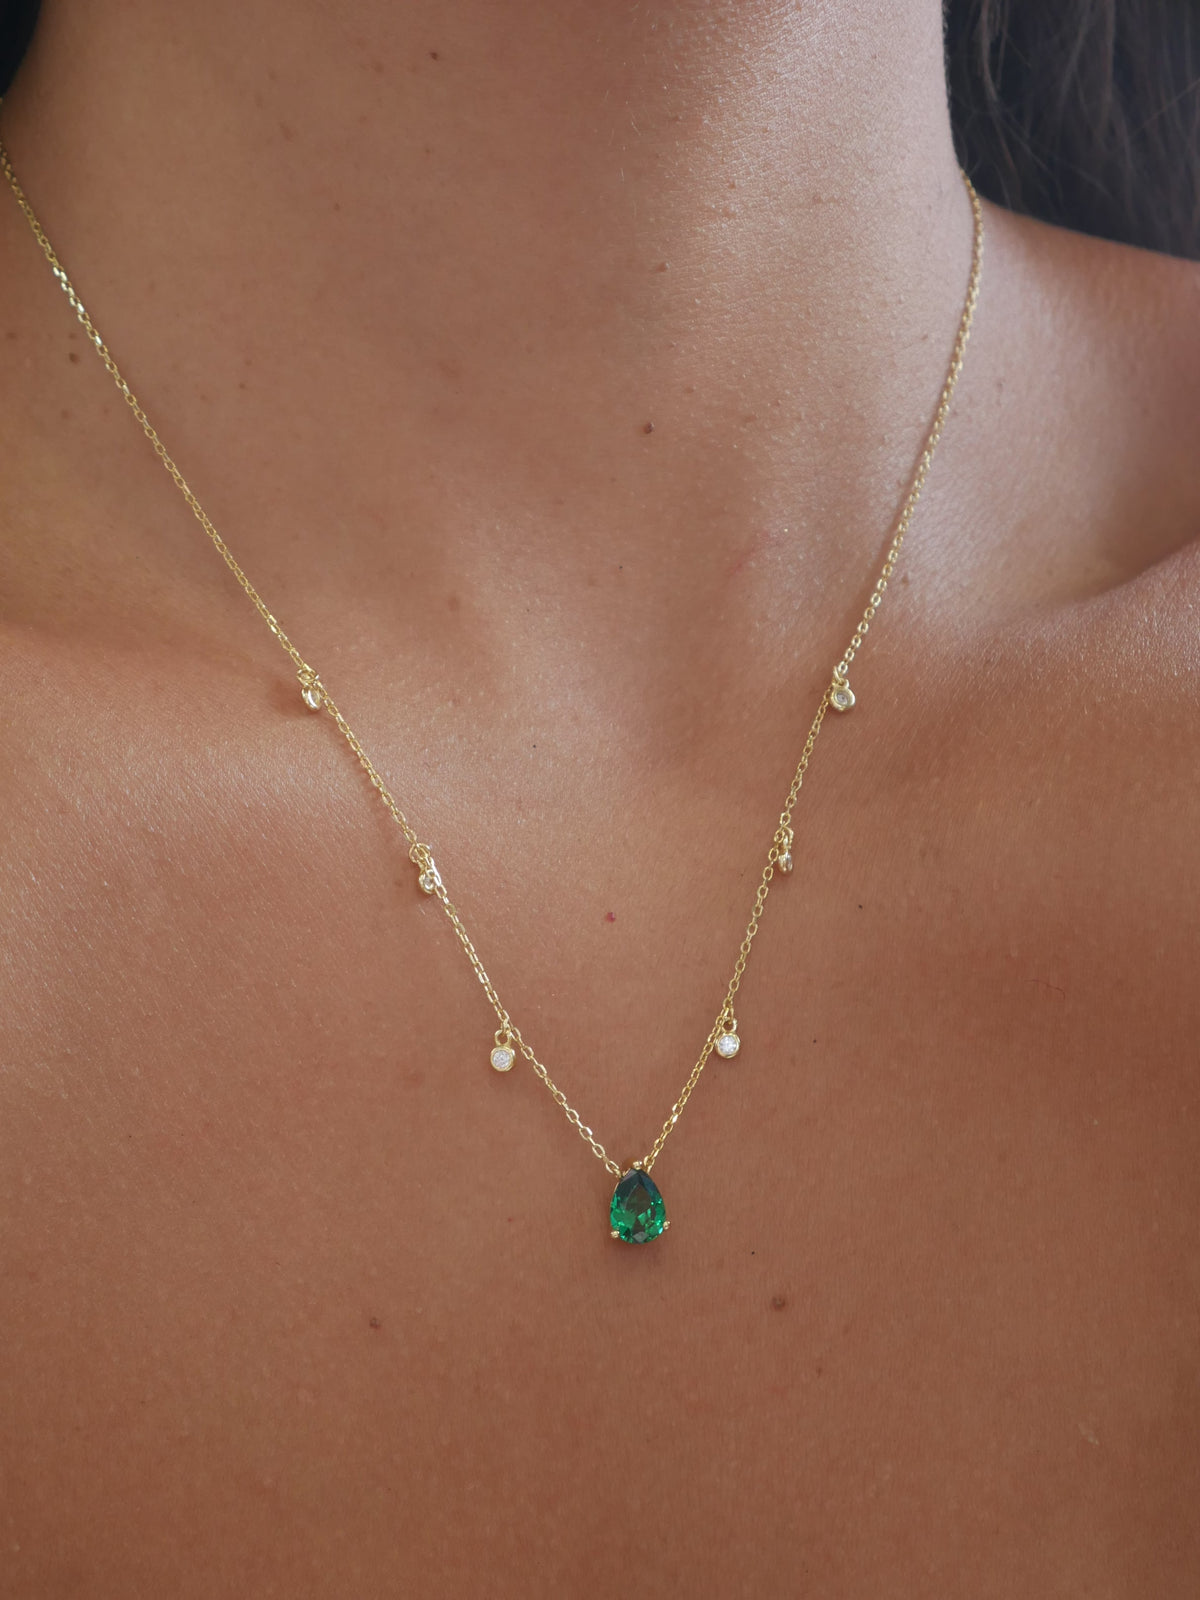 necklaces, emerald necklaces, gold and green rhinestone necklaces, .925 sterling silver, teardrop, pear shape necklaces, green and gold jewelry, rhinestone necklaces, dangling charm necklaces, casual necklaces, statement jewelry, designer inspired necklaces, good quality jewelry for cheap, nice jewelry, gift ideas, everyday necklaces